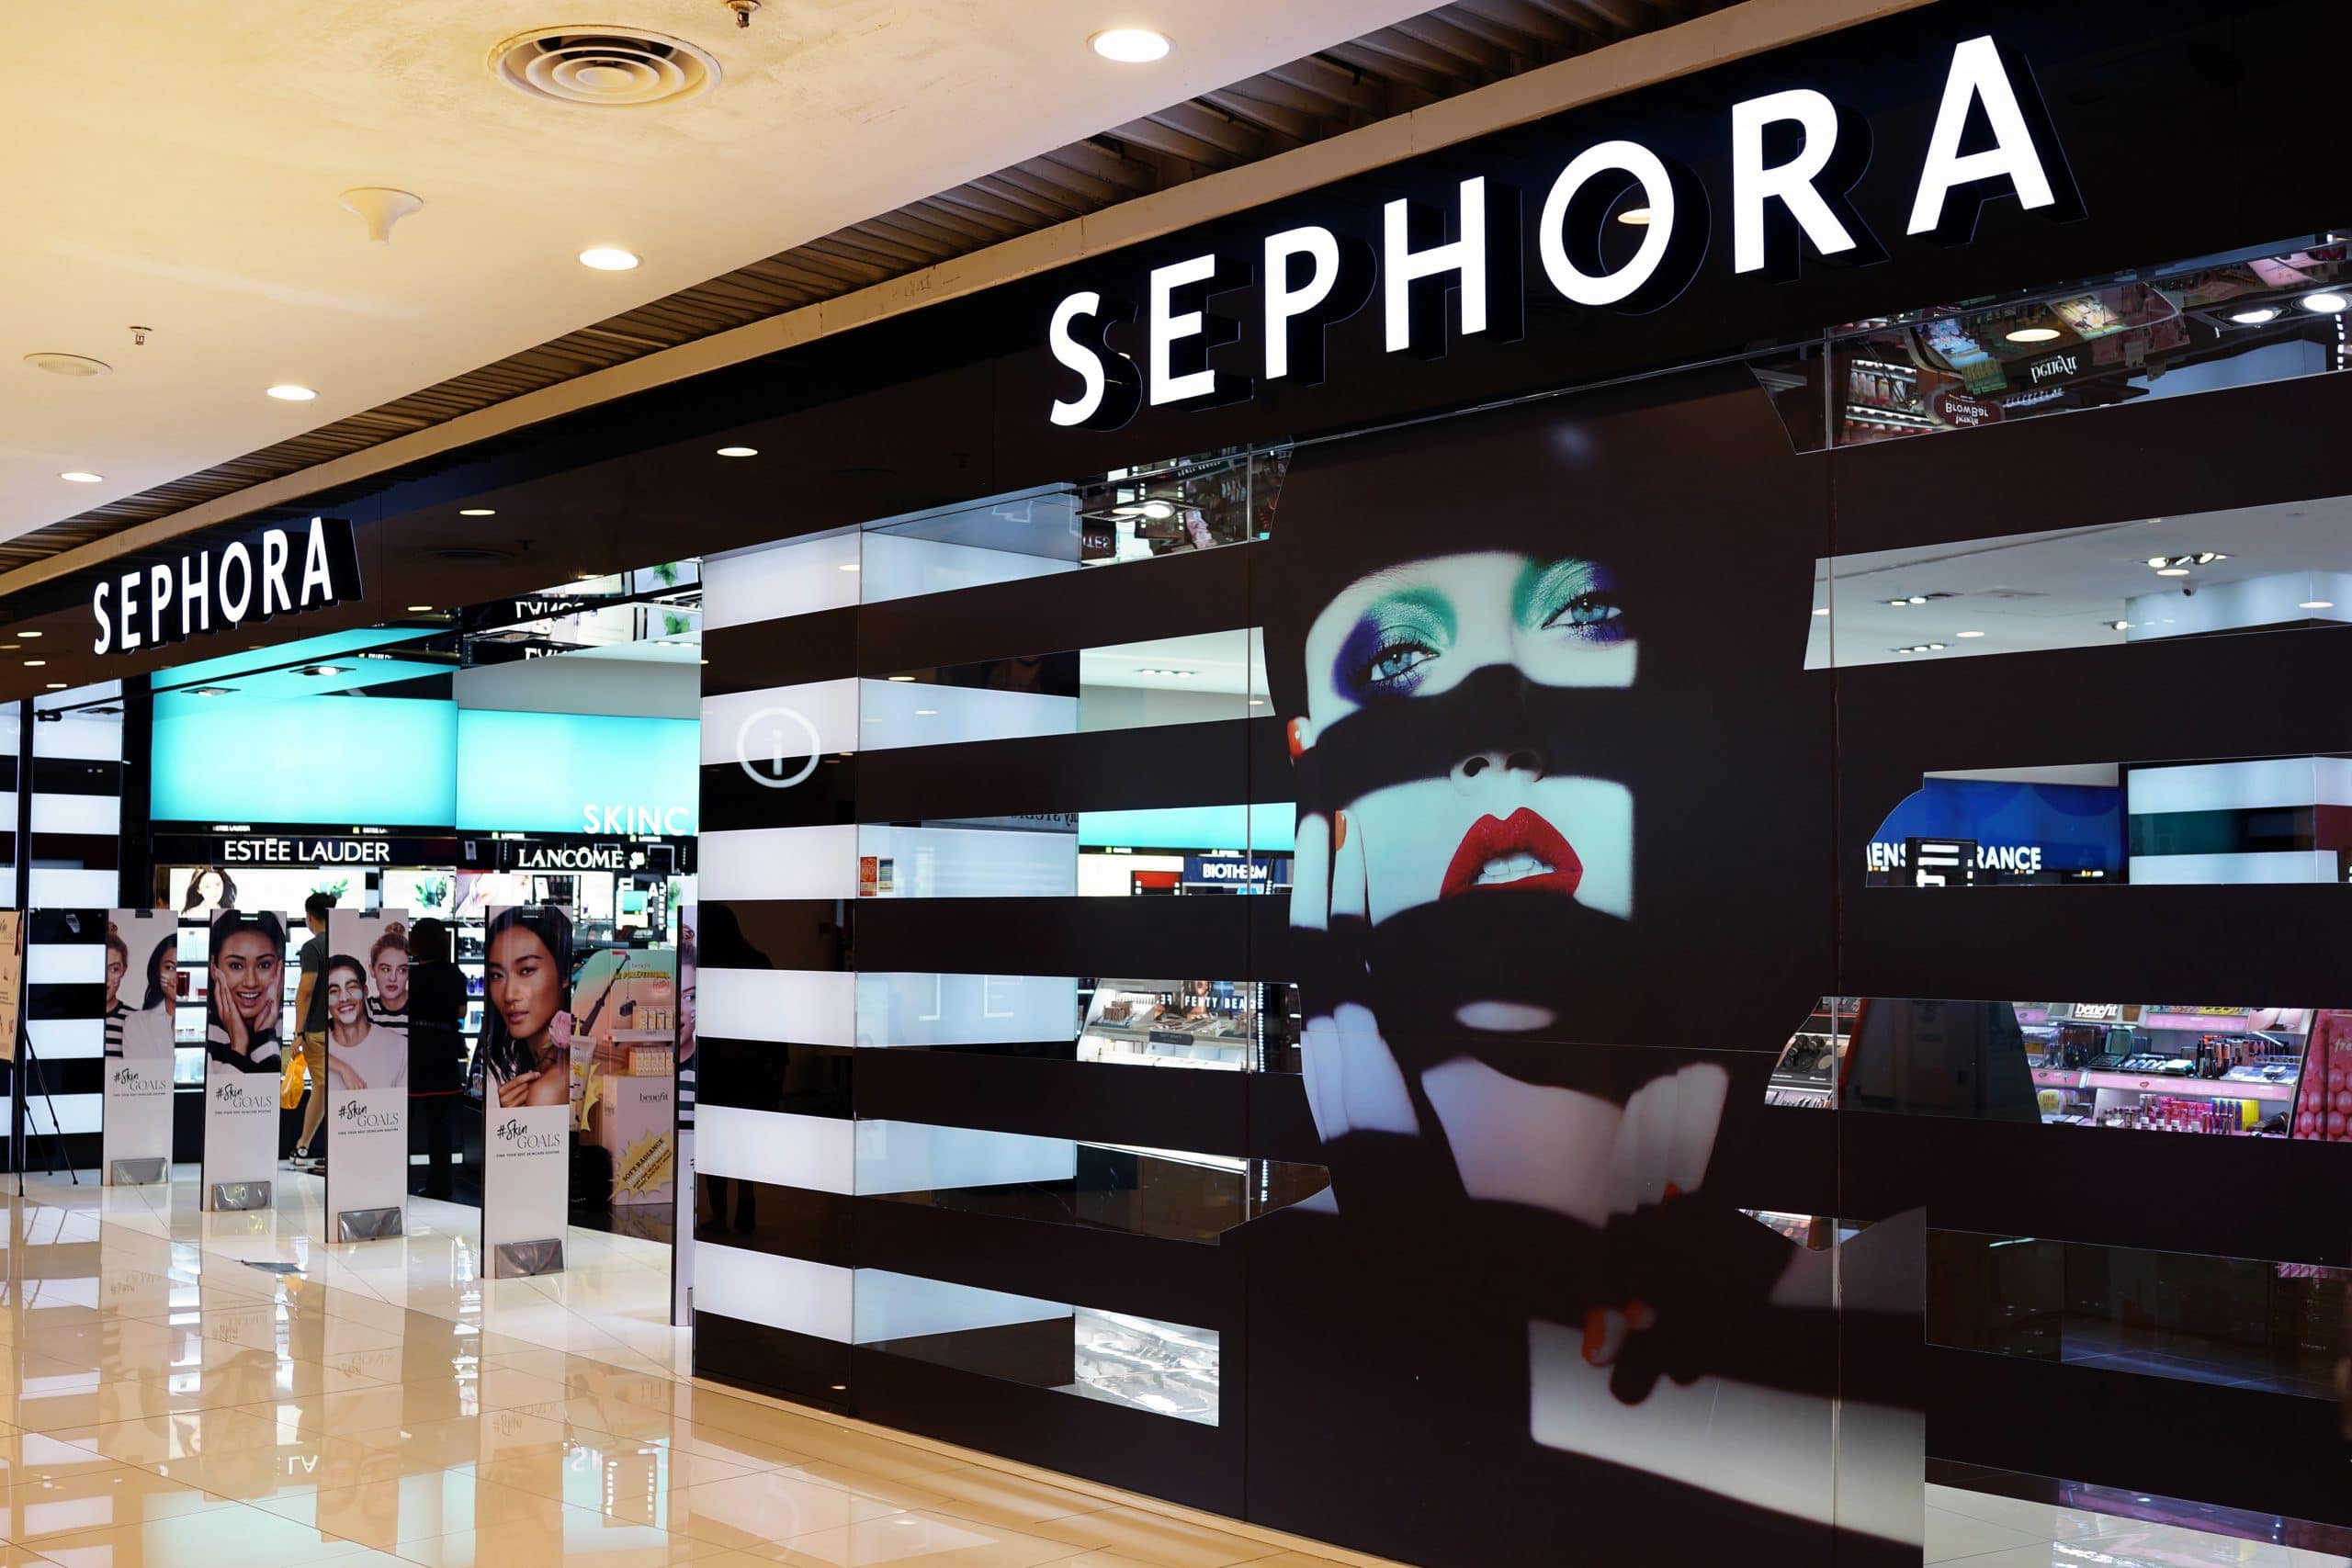 3 ways to earn a free Sephora gift card before your next night out